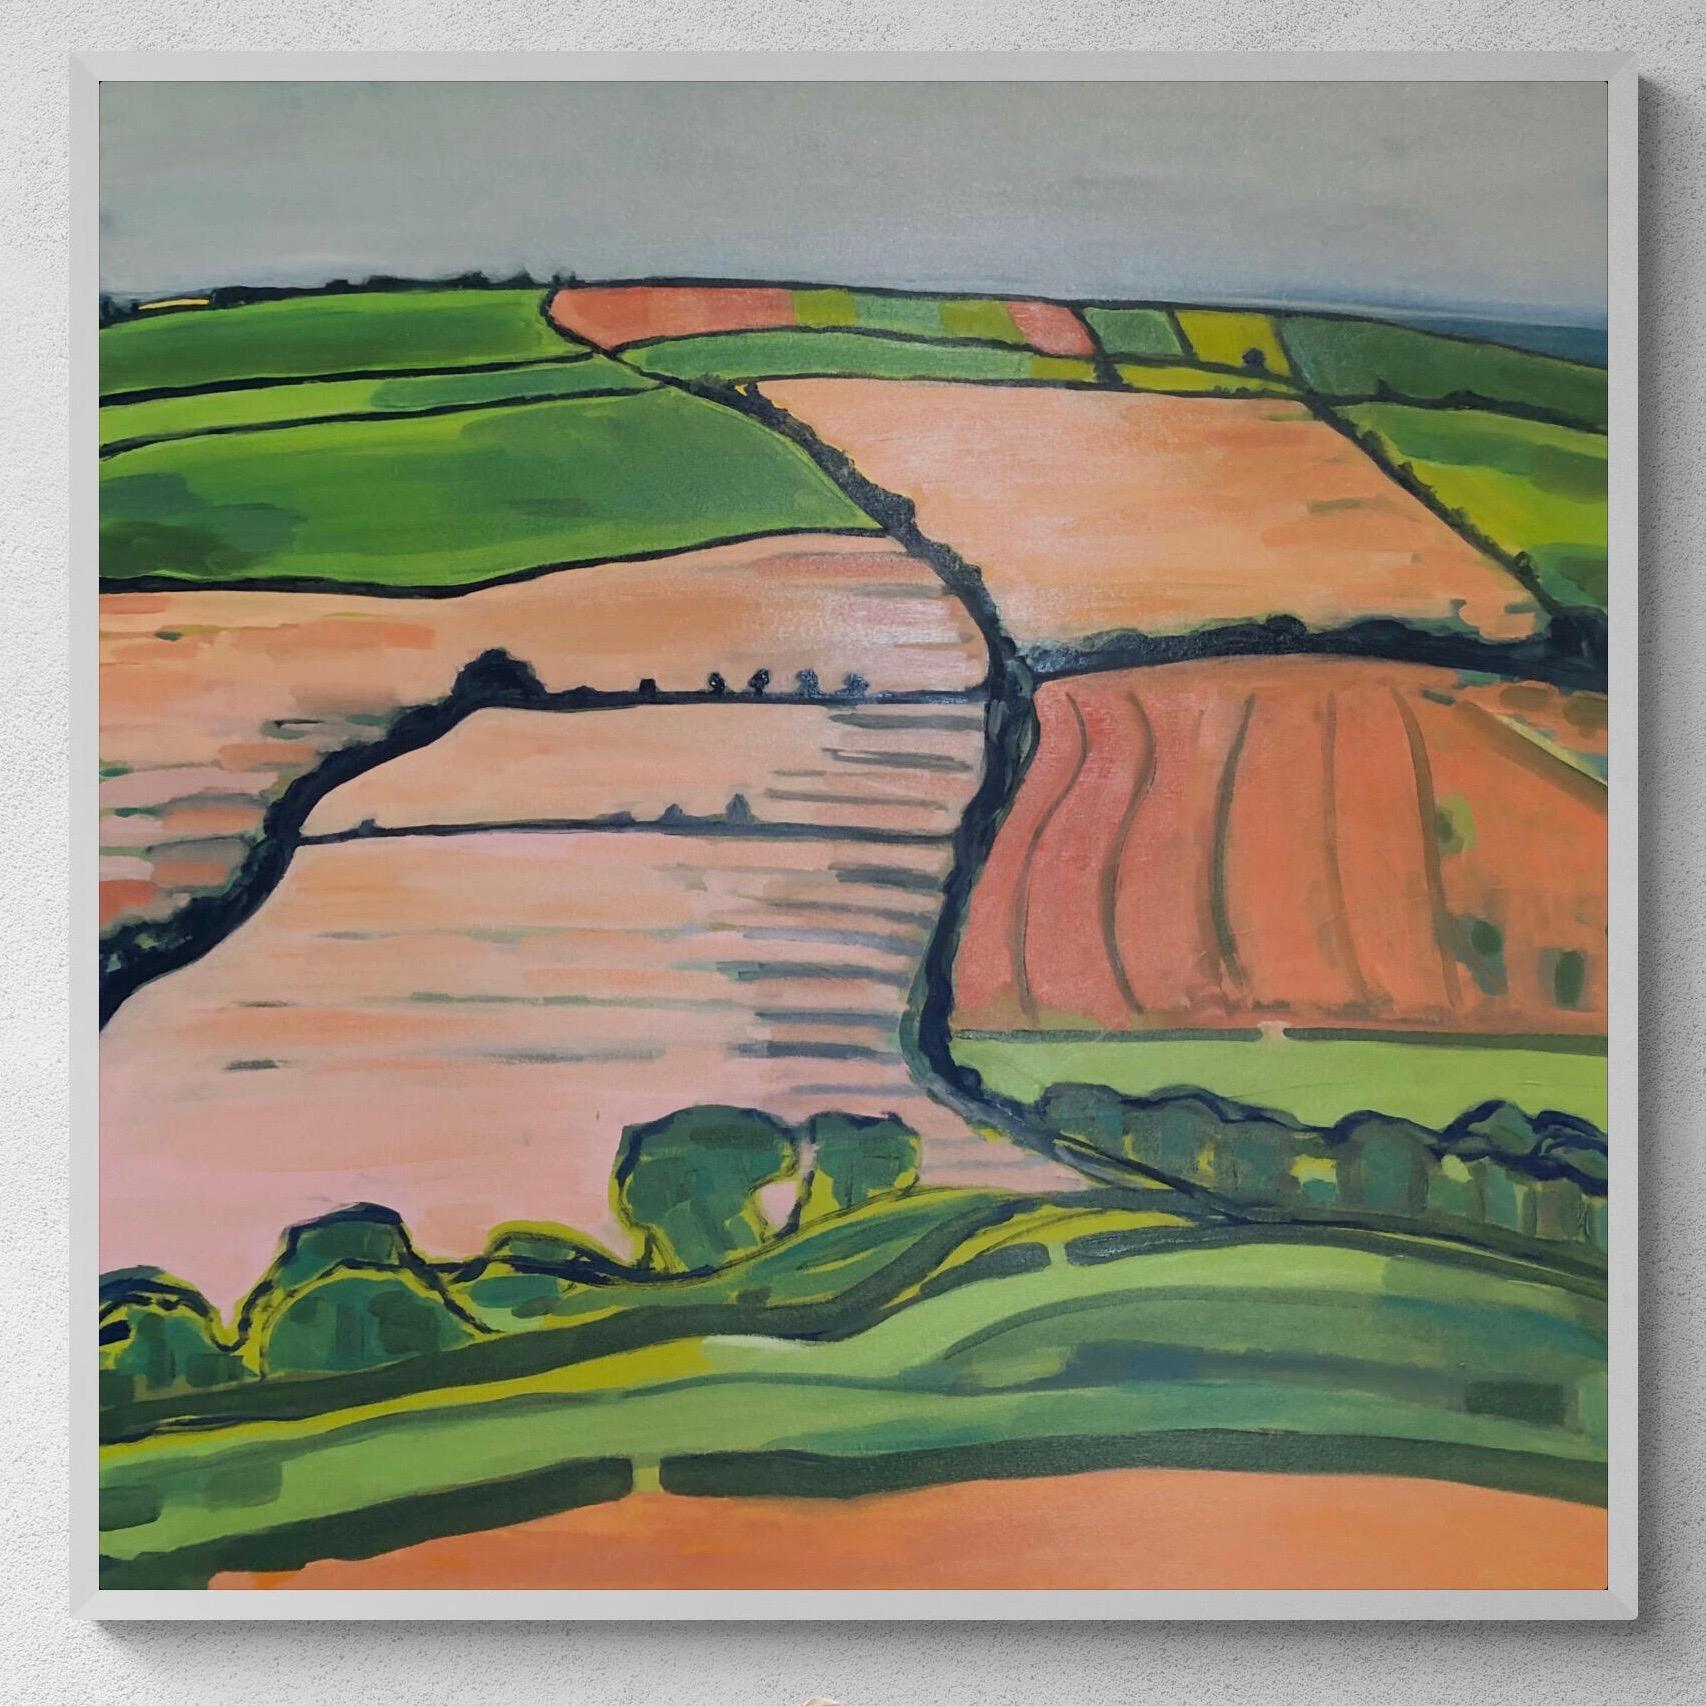 Rolling hill no. 1 is an original oil painting by artist Alexa Roscoe. This painting has a sense of freedom and playfulness as if it wants you to run away with it down the hill. It's combination and balance of vibrant and calming colours create an